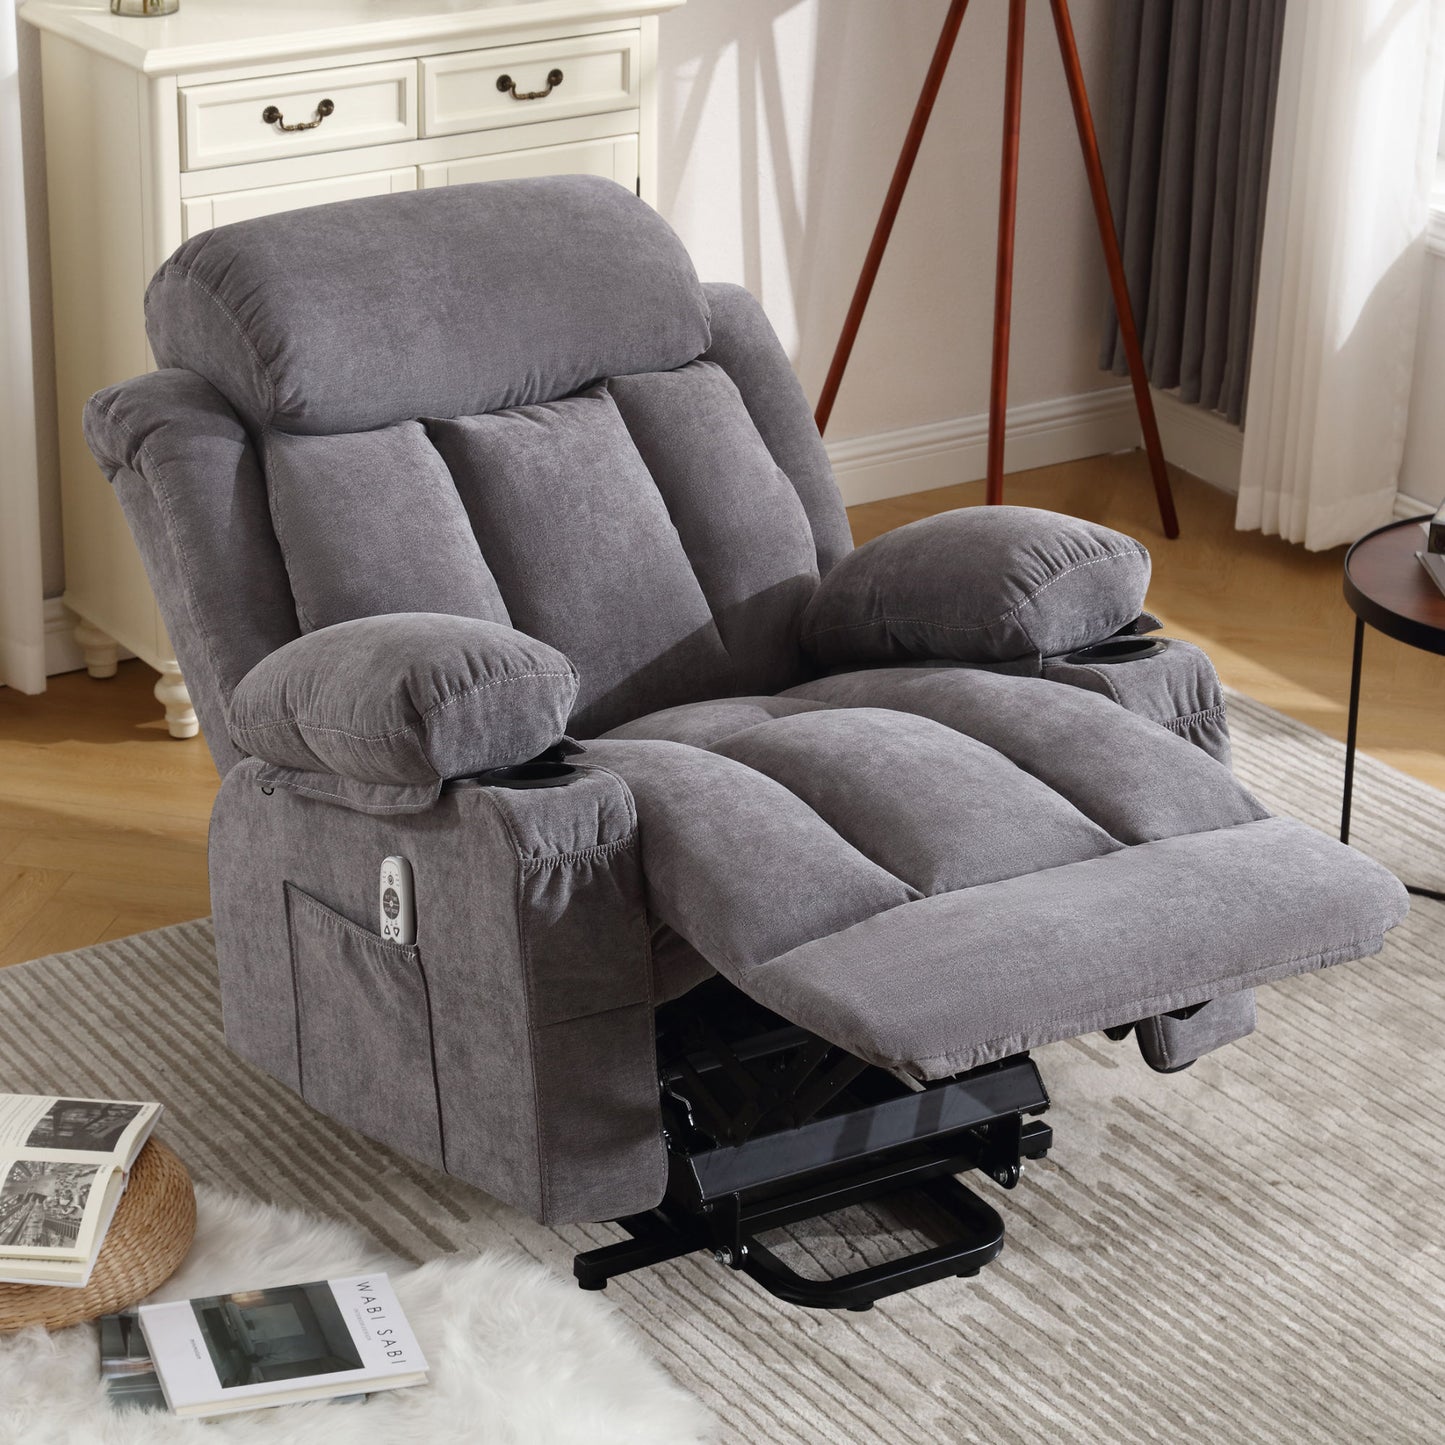 Power Lift Recliner Chair with Heat and Massage Electric Fabric Recliner Chair for Elderly with Side Pocket, USB Charge Port, Remote Control for Living Room (Grey)